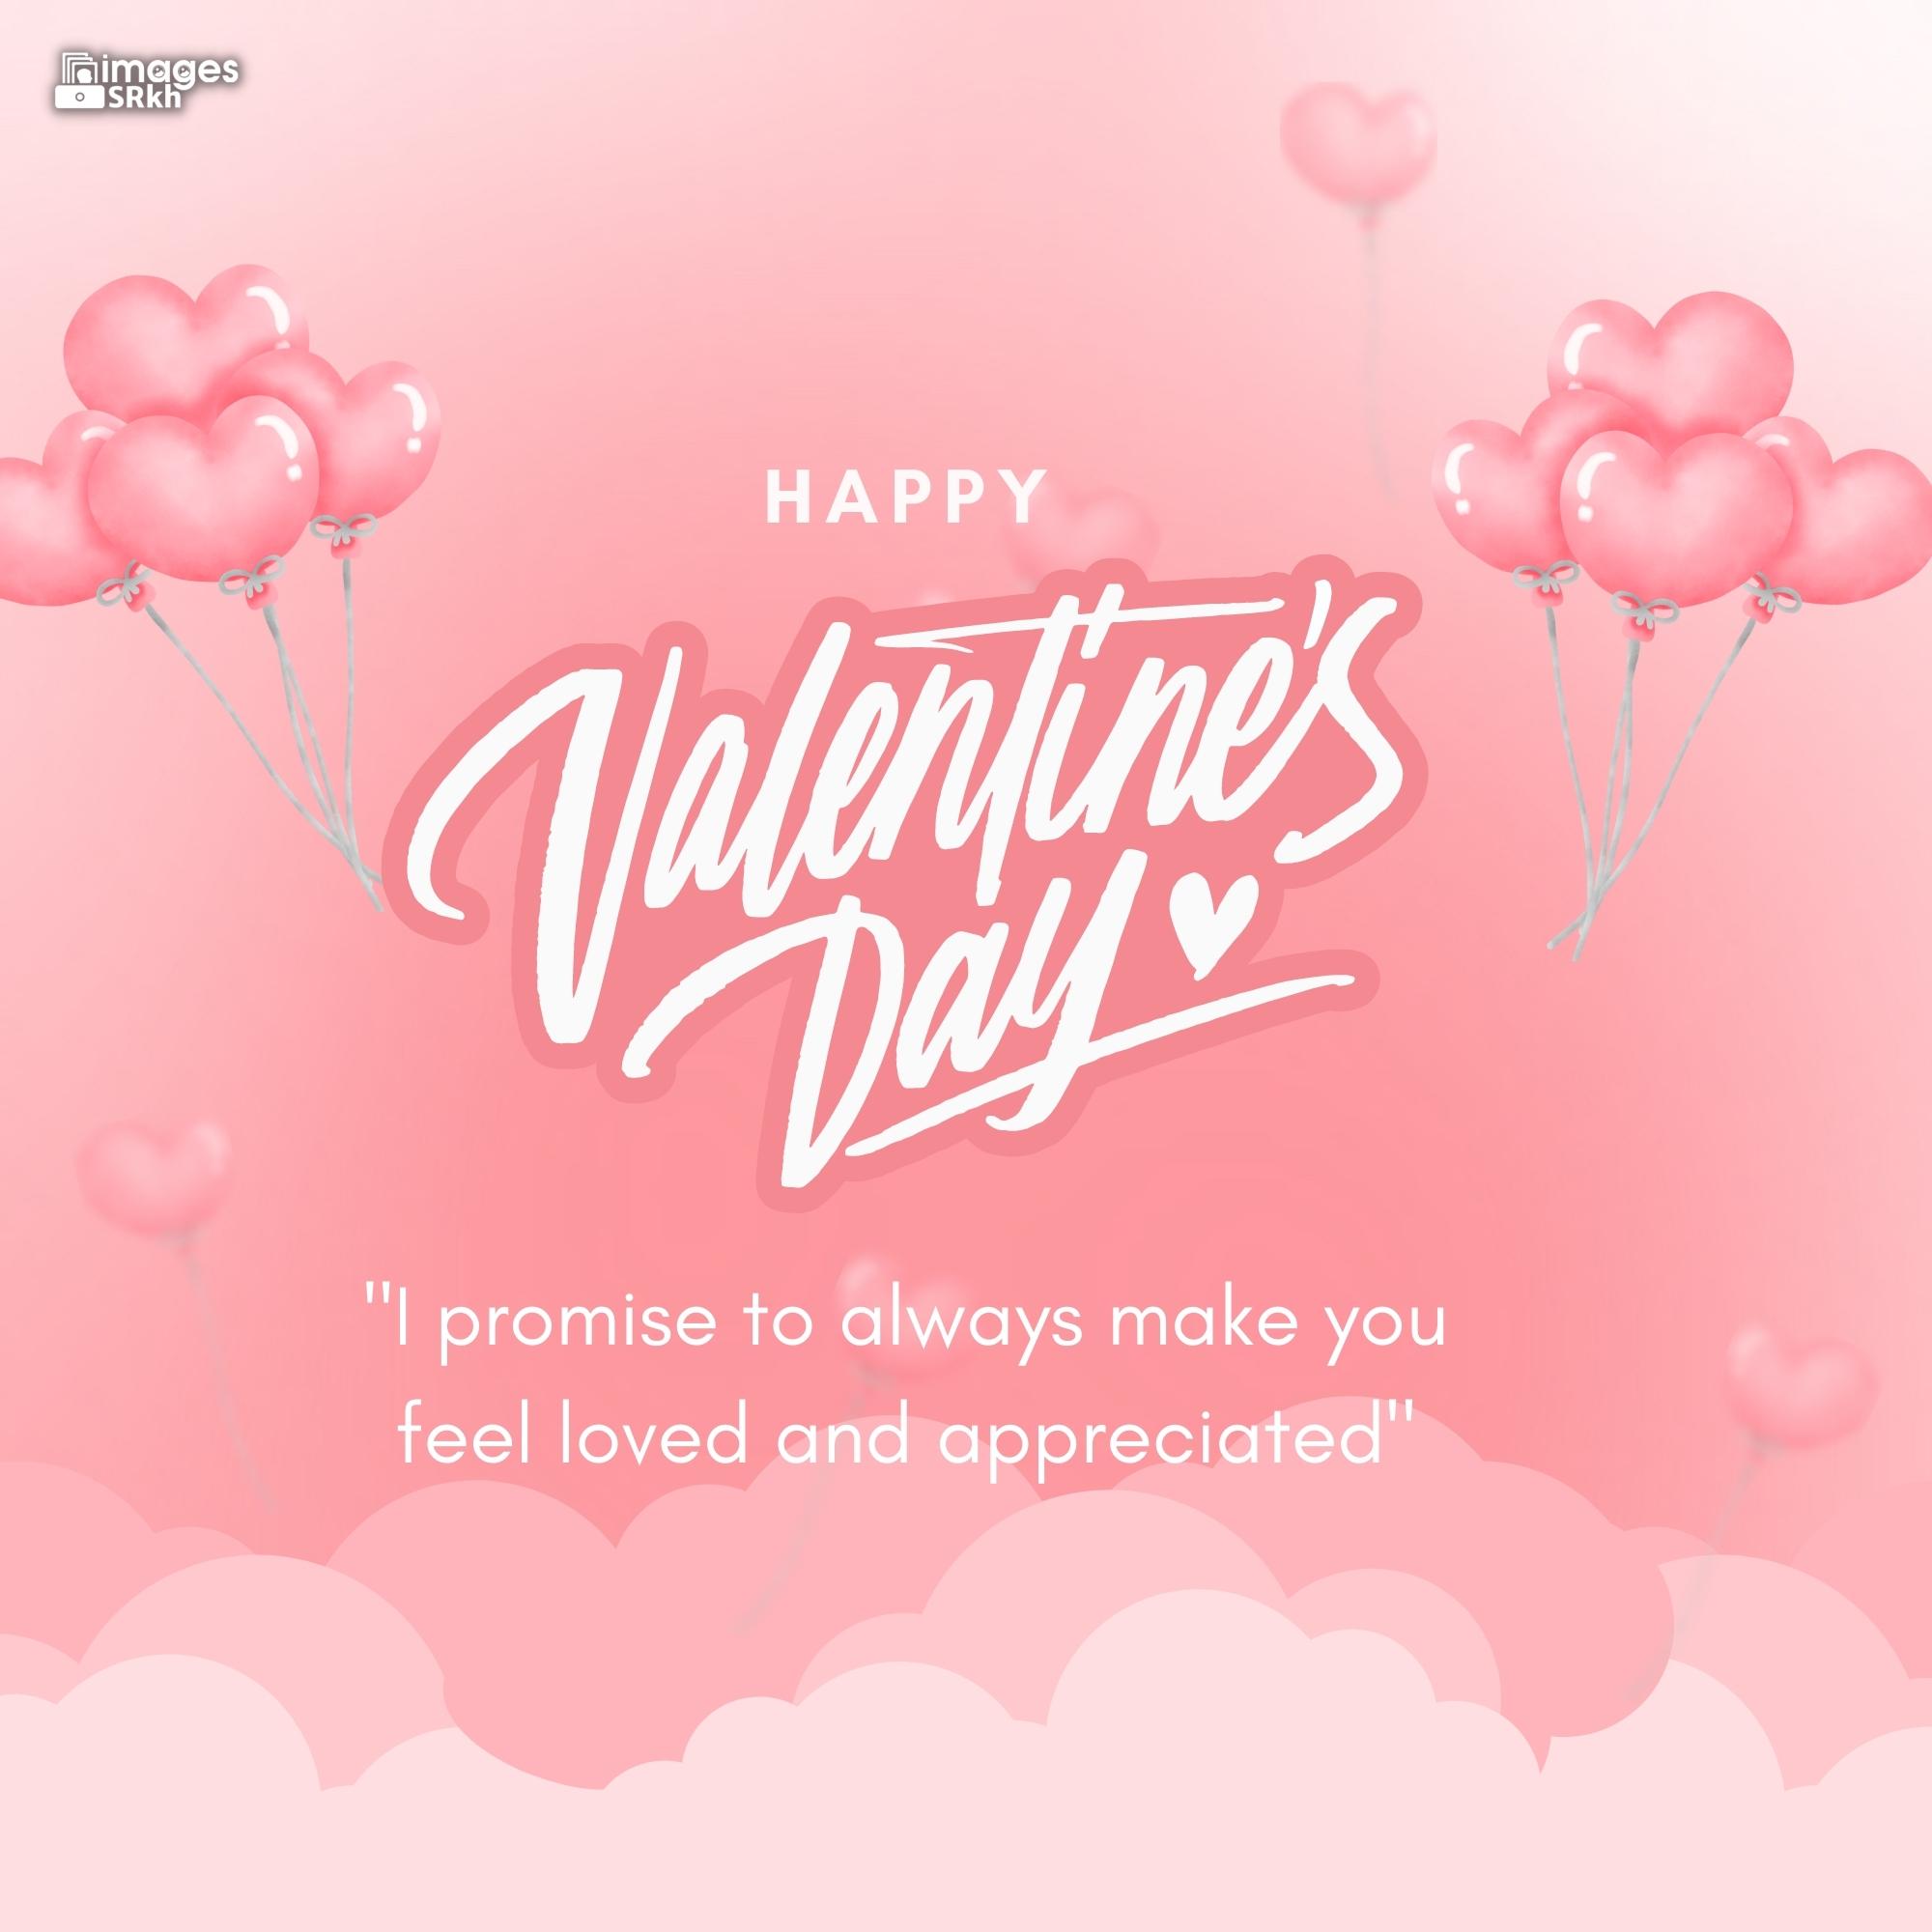 Happy Valentines Day | 527 | PREMIUM IMAGES | Wishes for Love